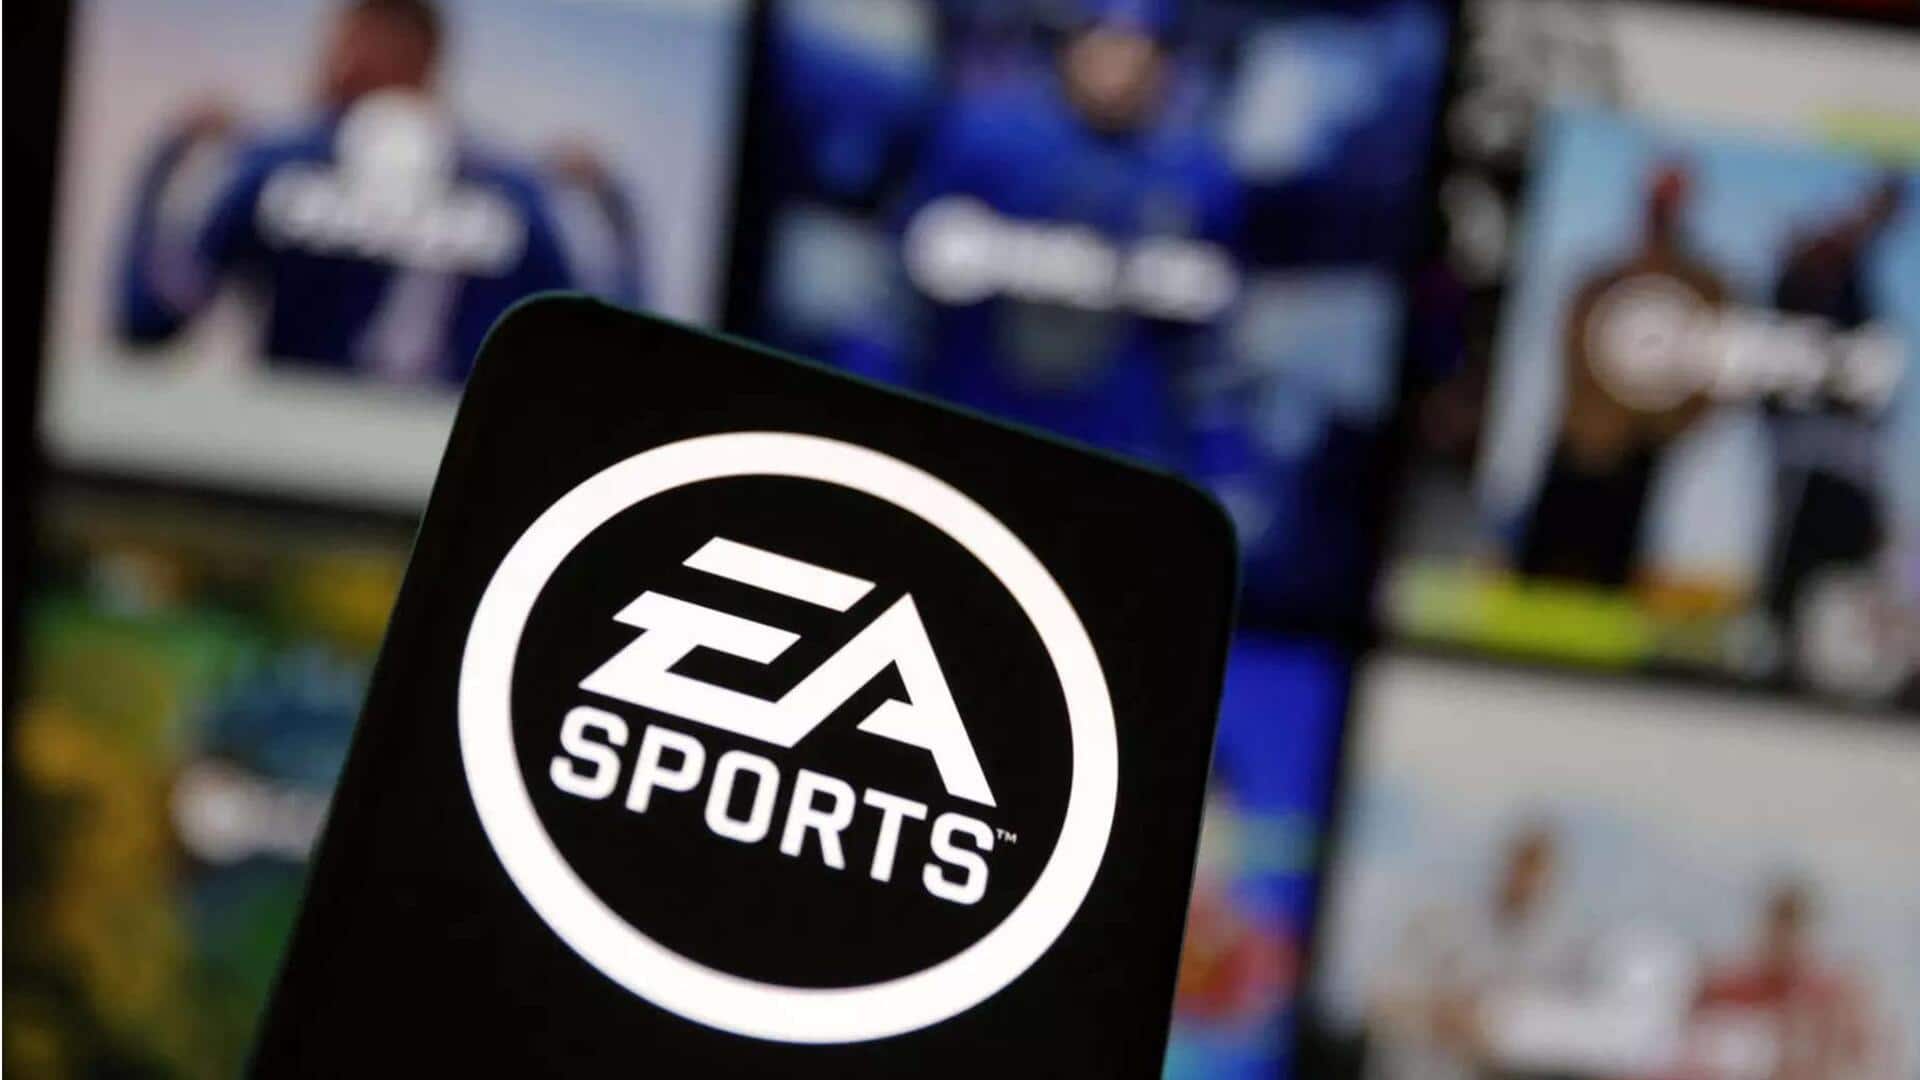 EA to fire over 650 employees amid gaming industry slump